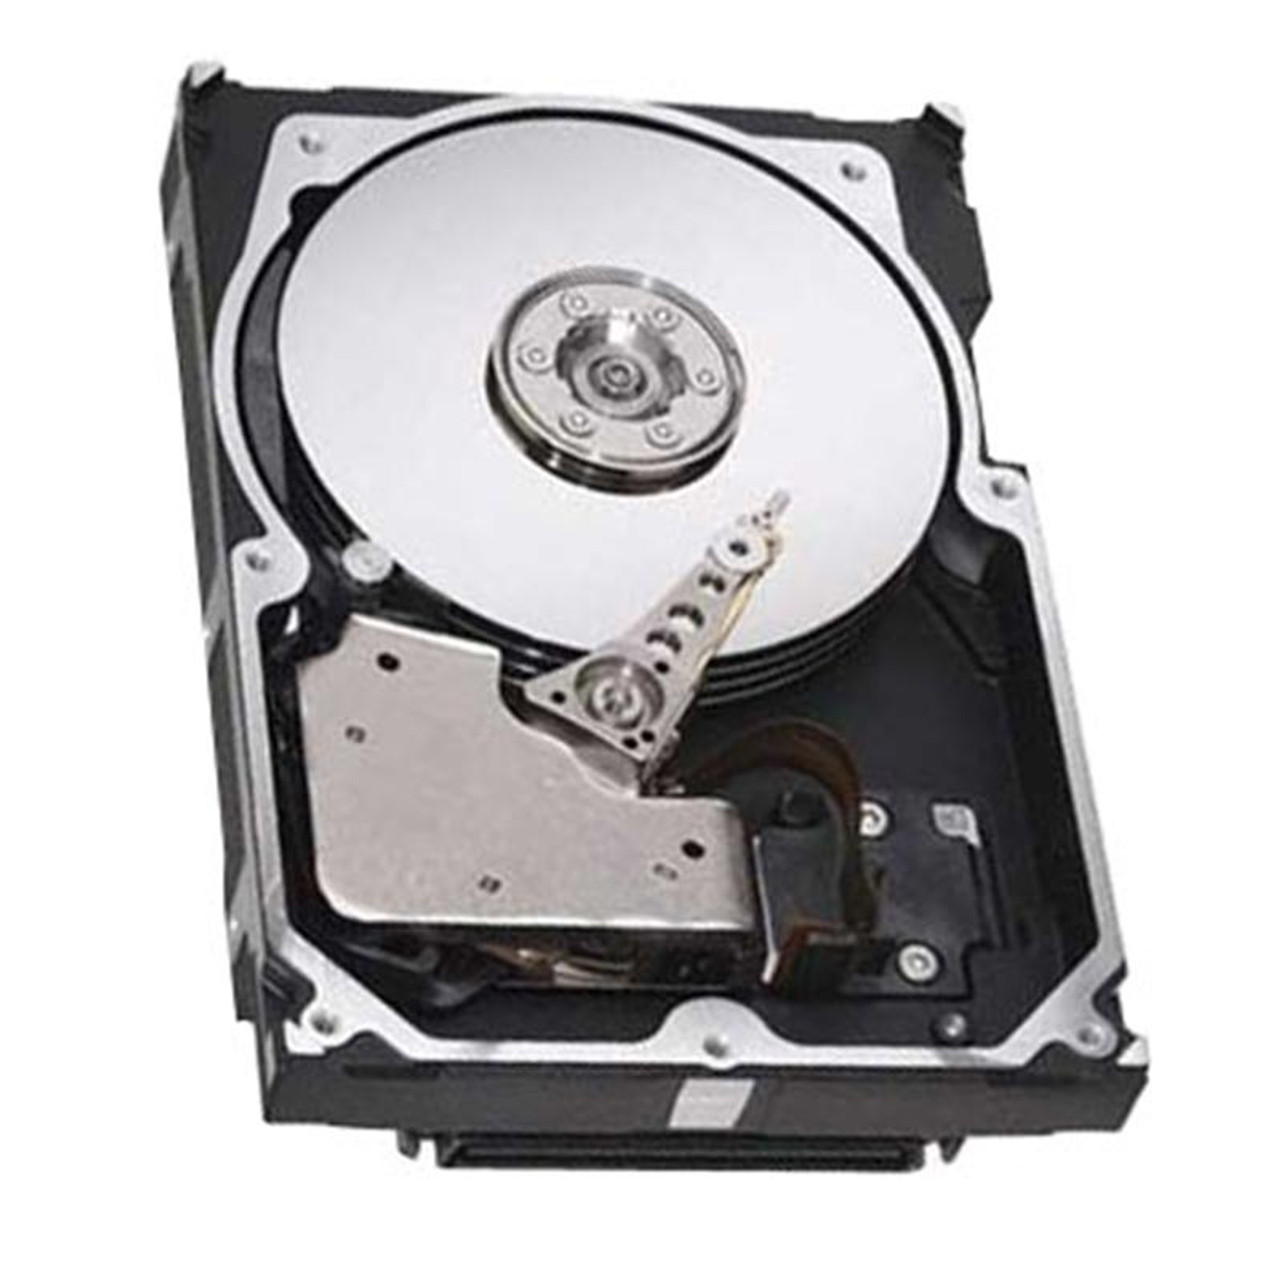 005045382 EMC 300GB 10000RPM Fibre Channel 2Gbps 16MB Cache 3.5-inch Internal Hard Drive for CLARiiON CX3/ CX Series Storage Systems